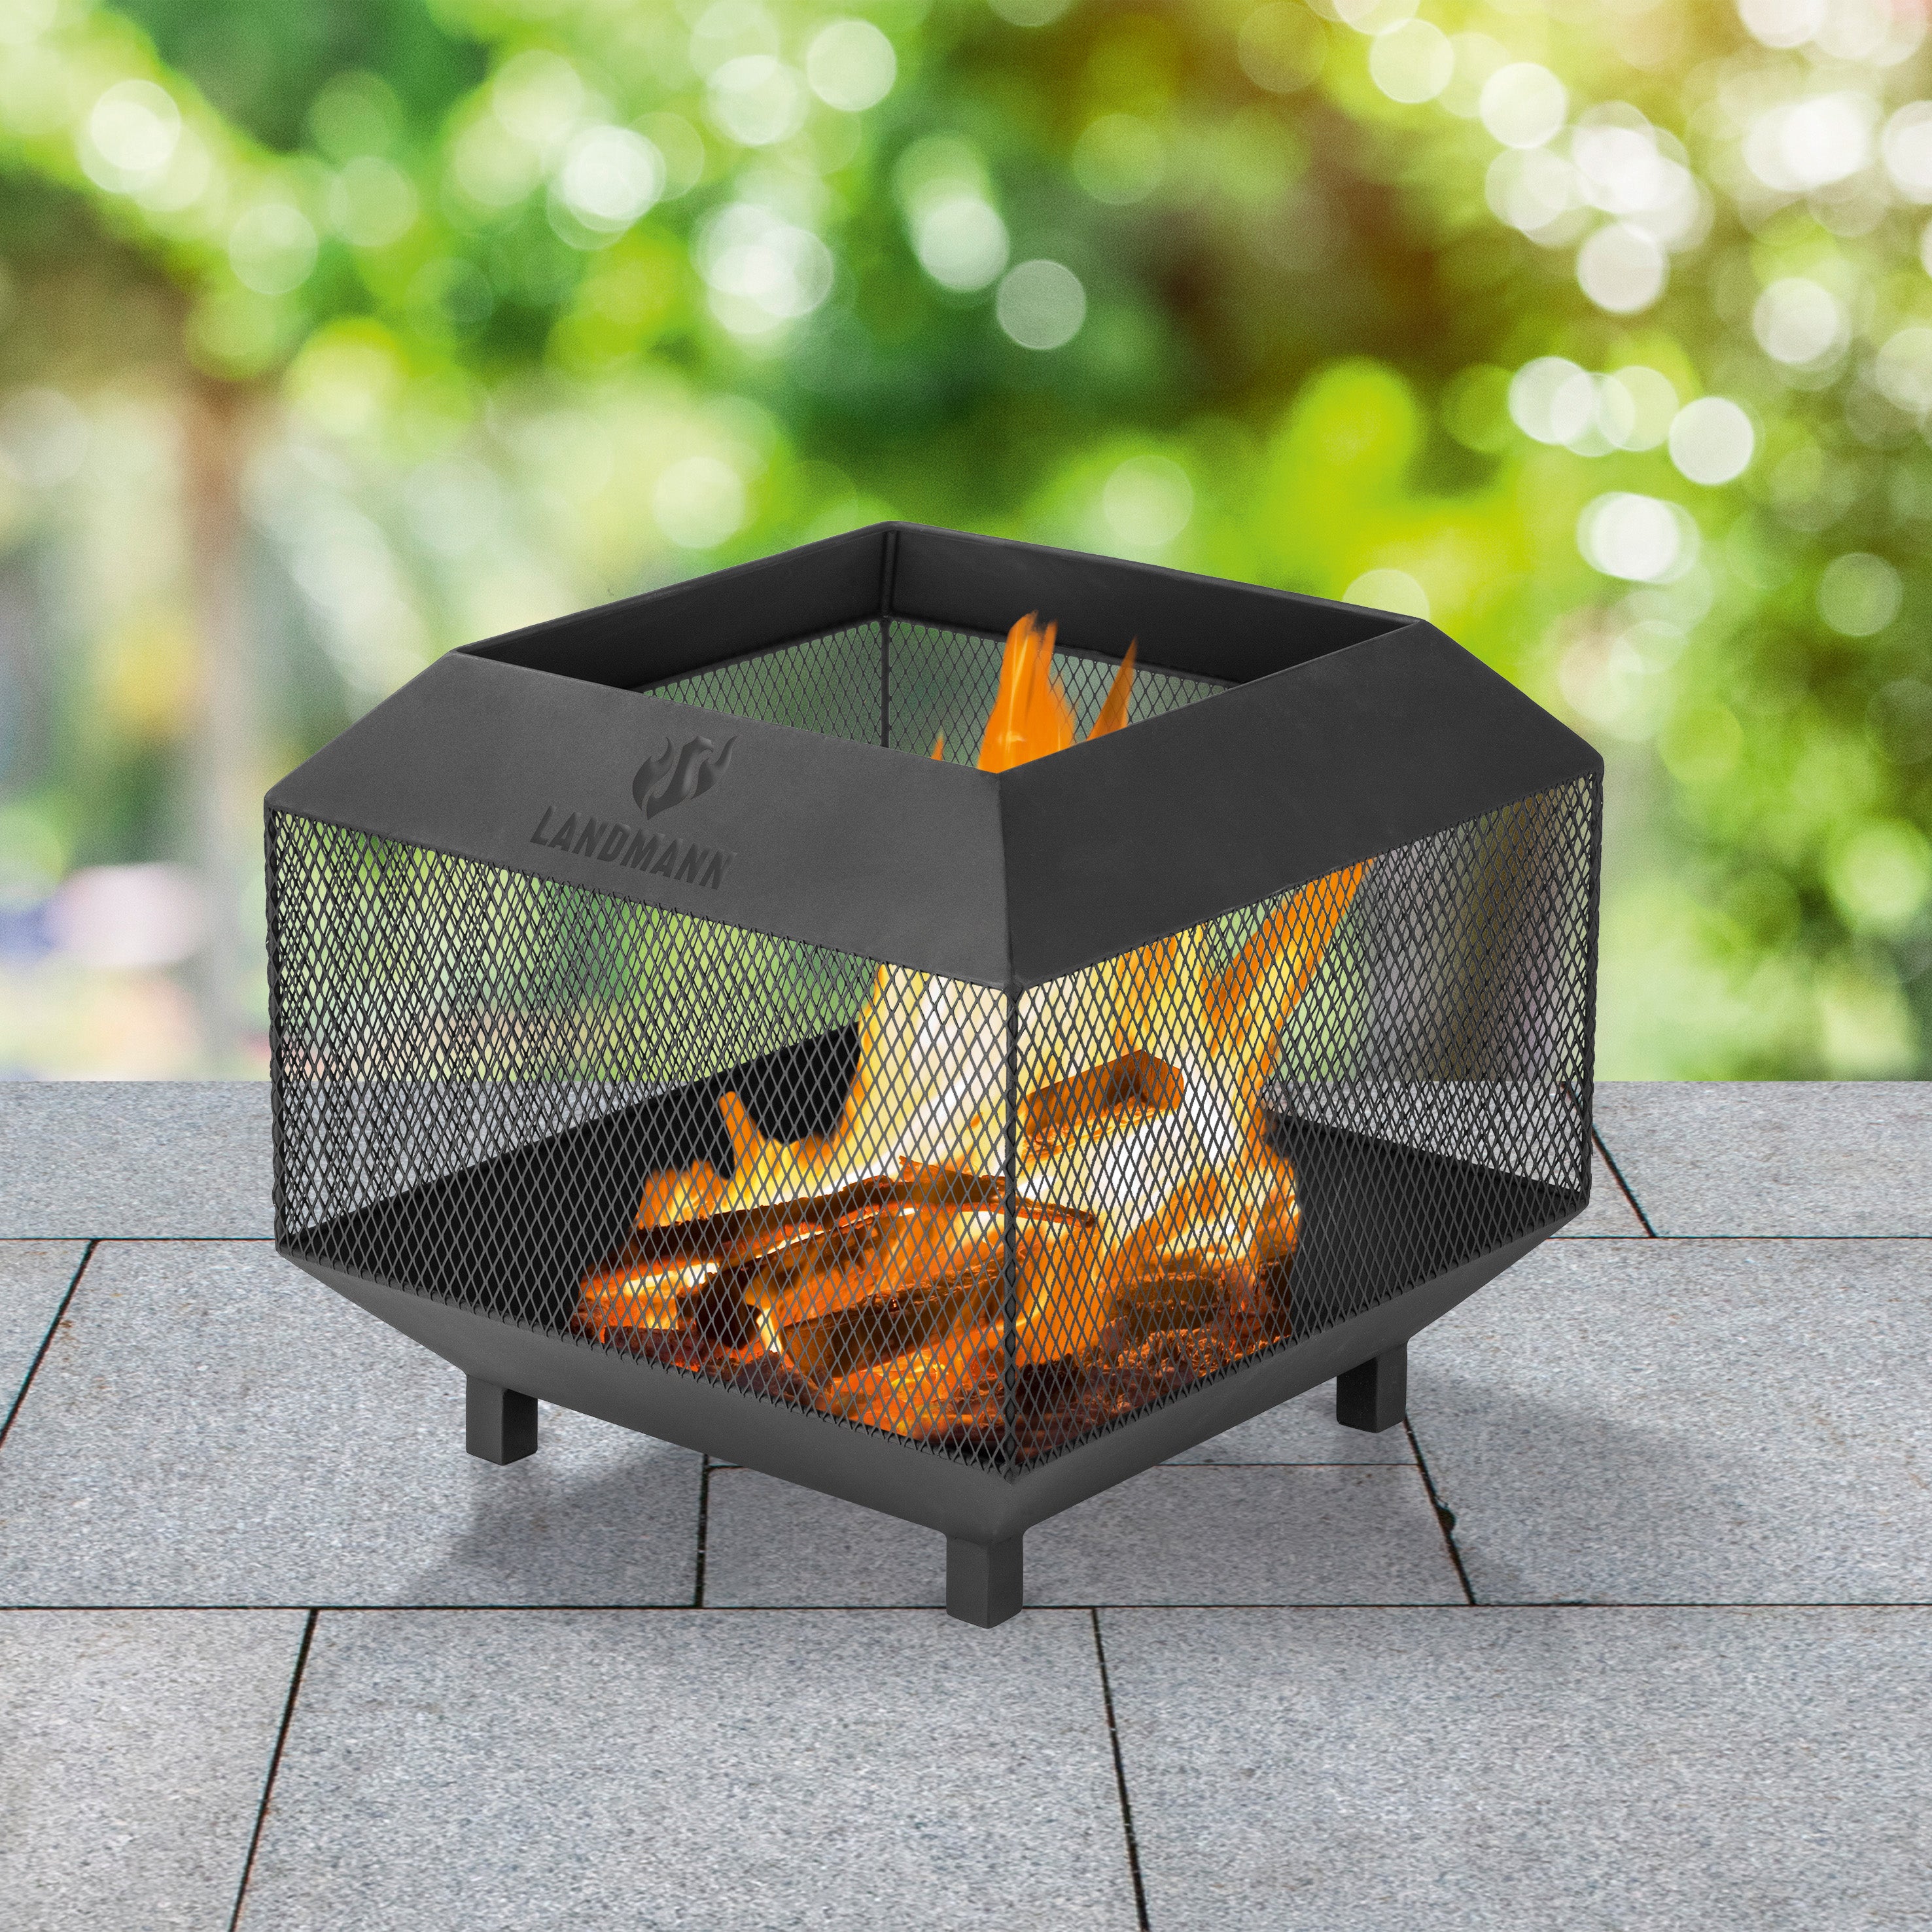 Fire Basket Square - Outdoor